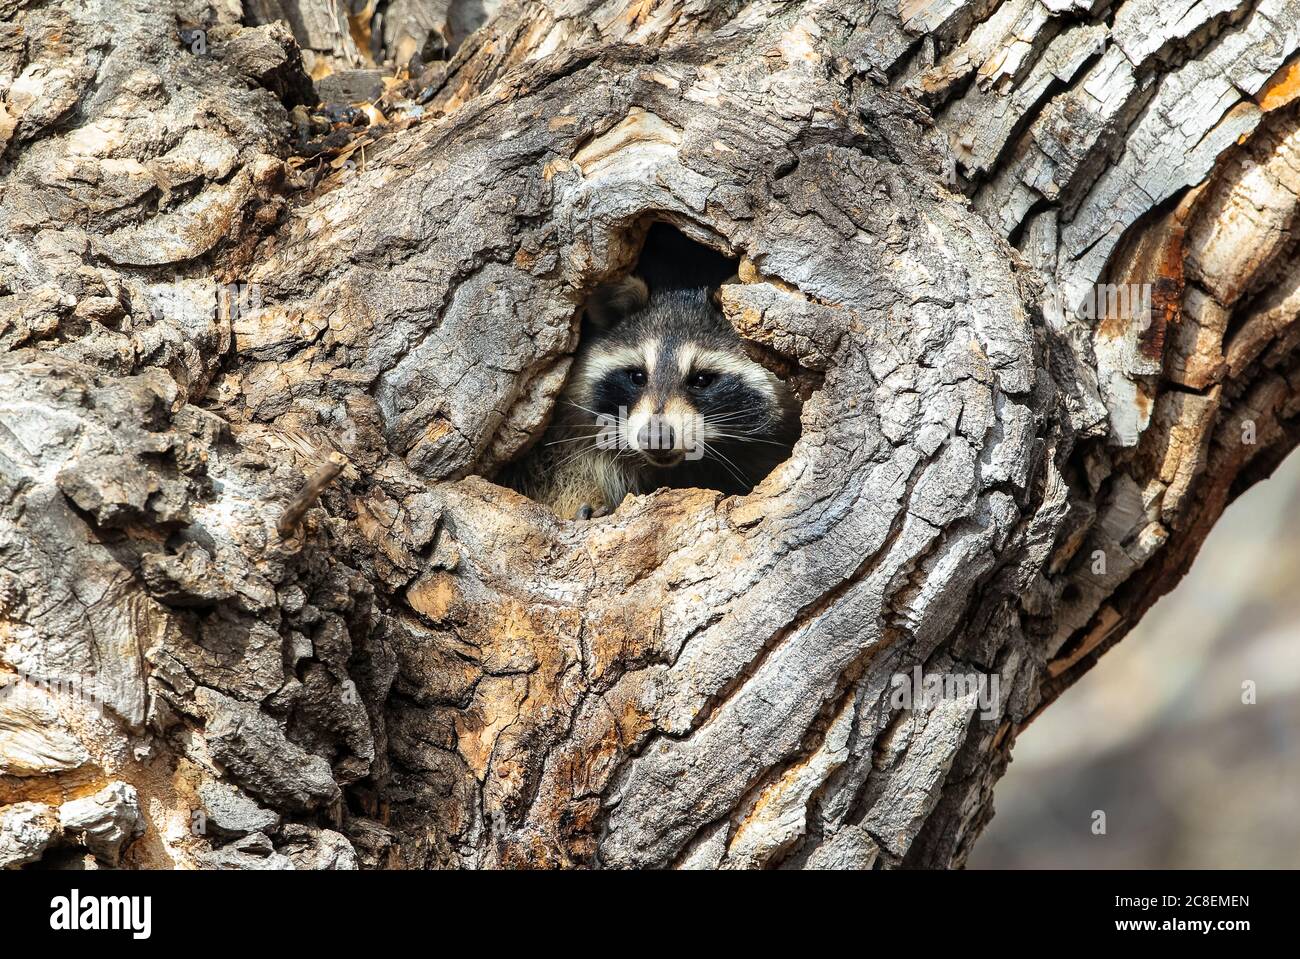 A Raccoon peers out of a hole in a large mature tree in the daytime. Stock Photo